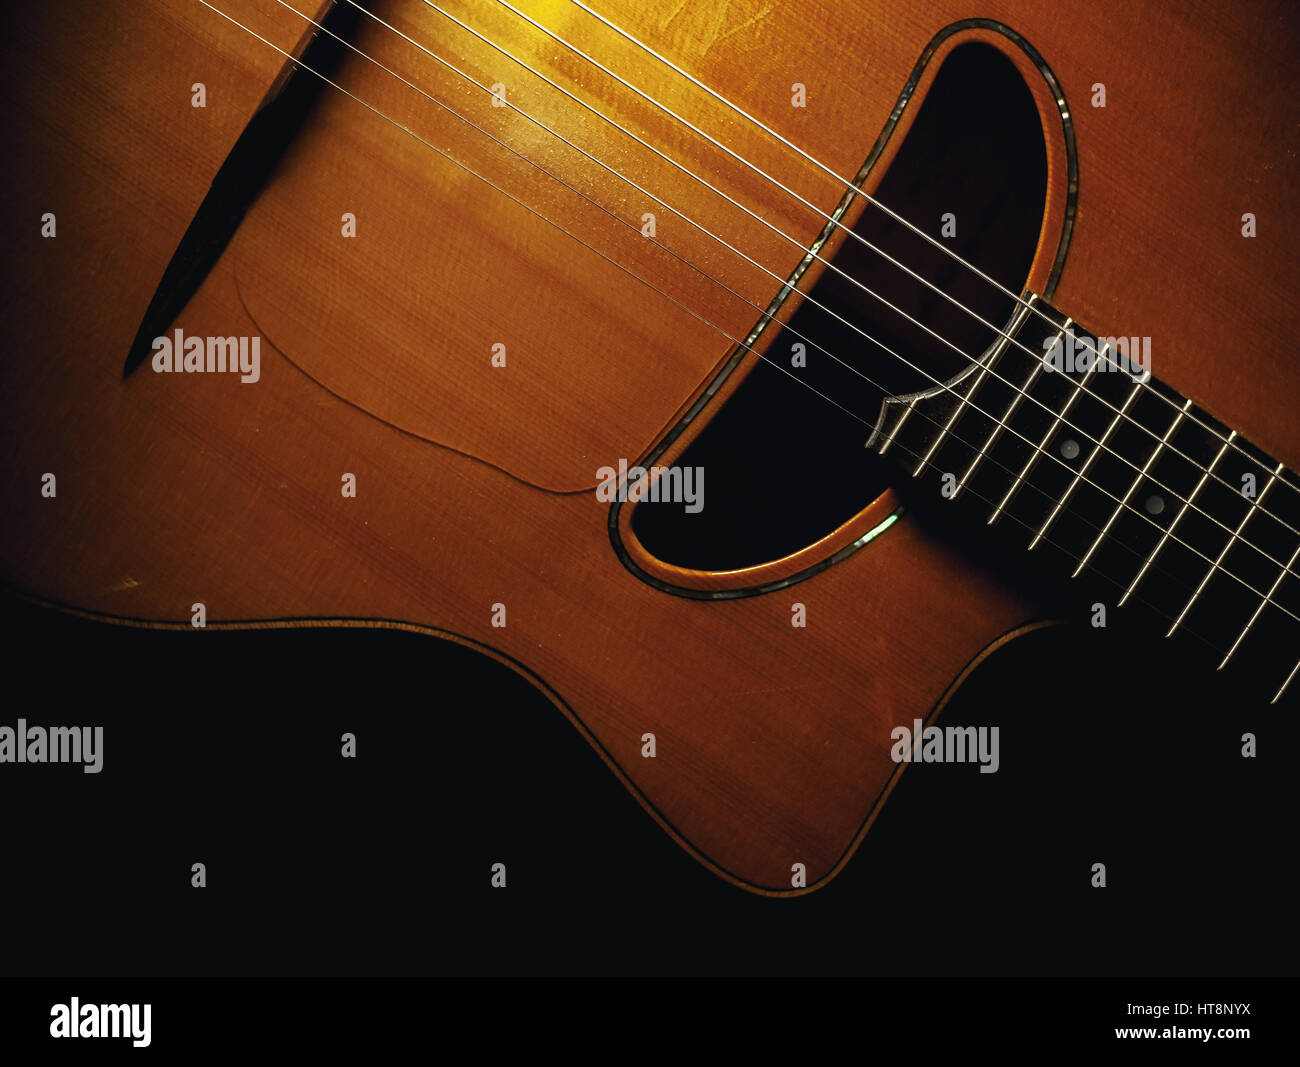 Gypsy acoustic guitar body and neck, closeup view. Stock Photo